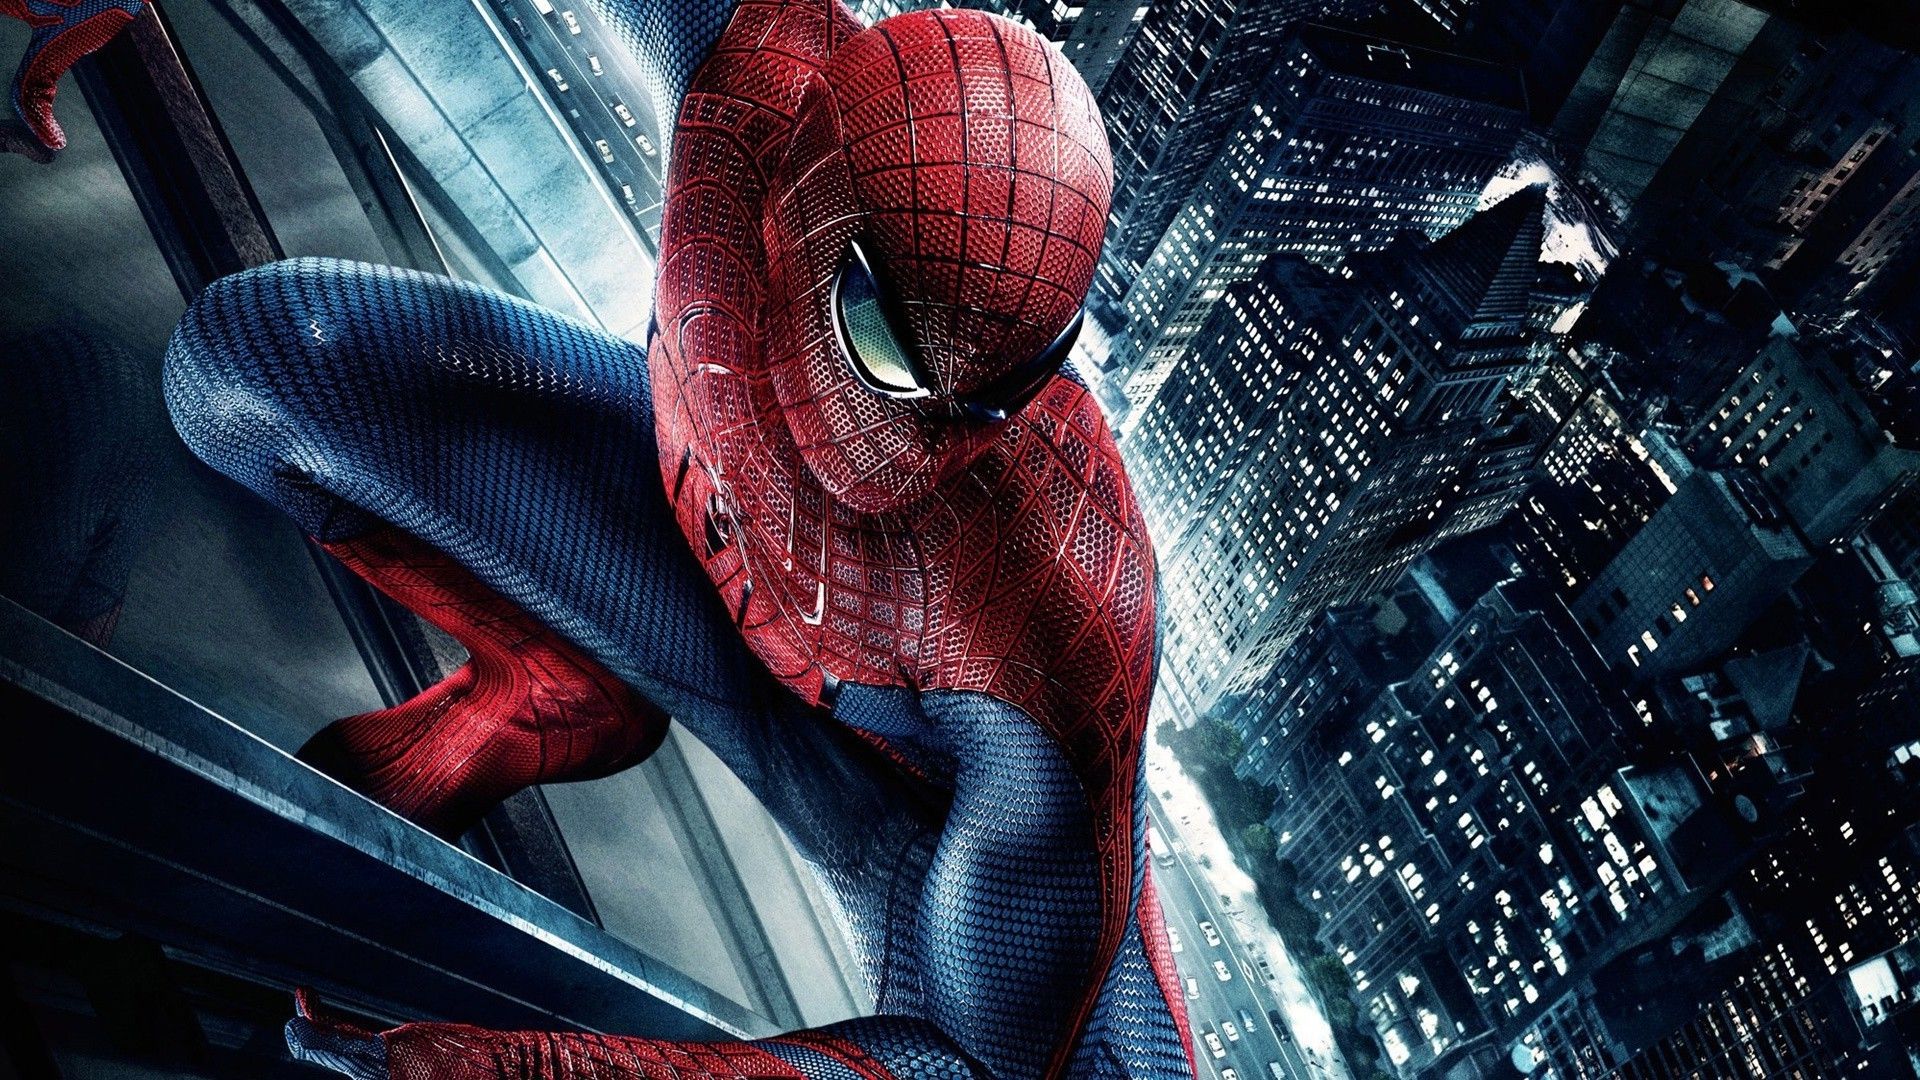 Spider Man, Movies, The Amazing Spider Man Wallpaper HD / Desktop and Mobile Background